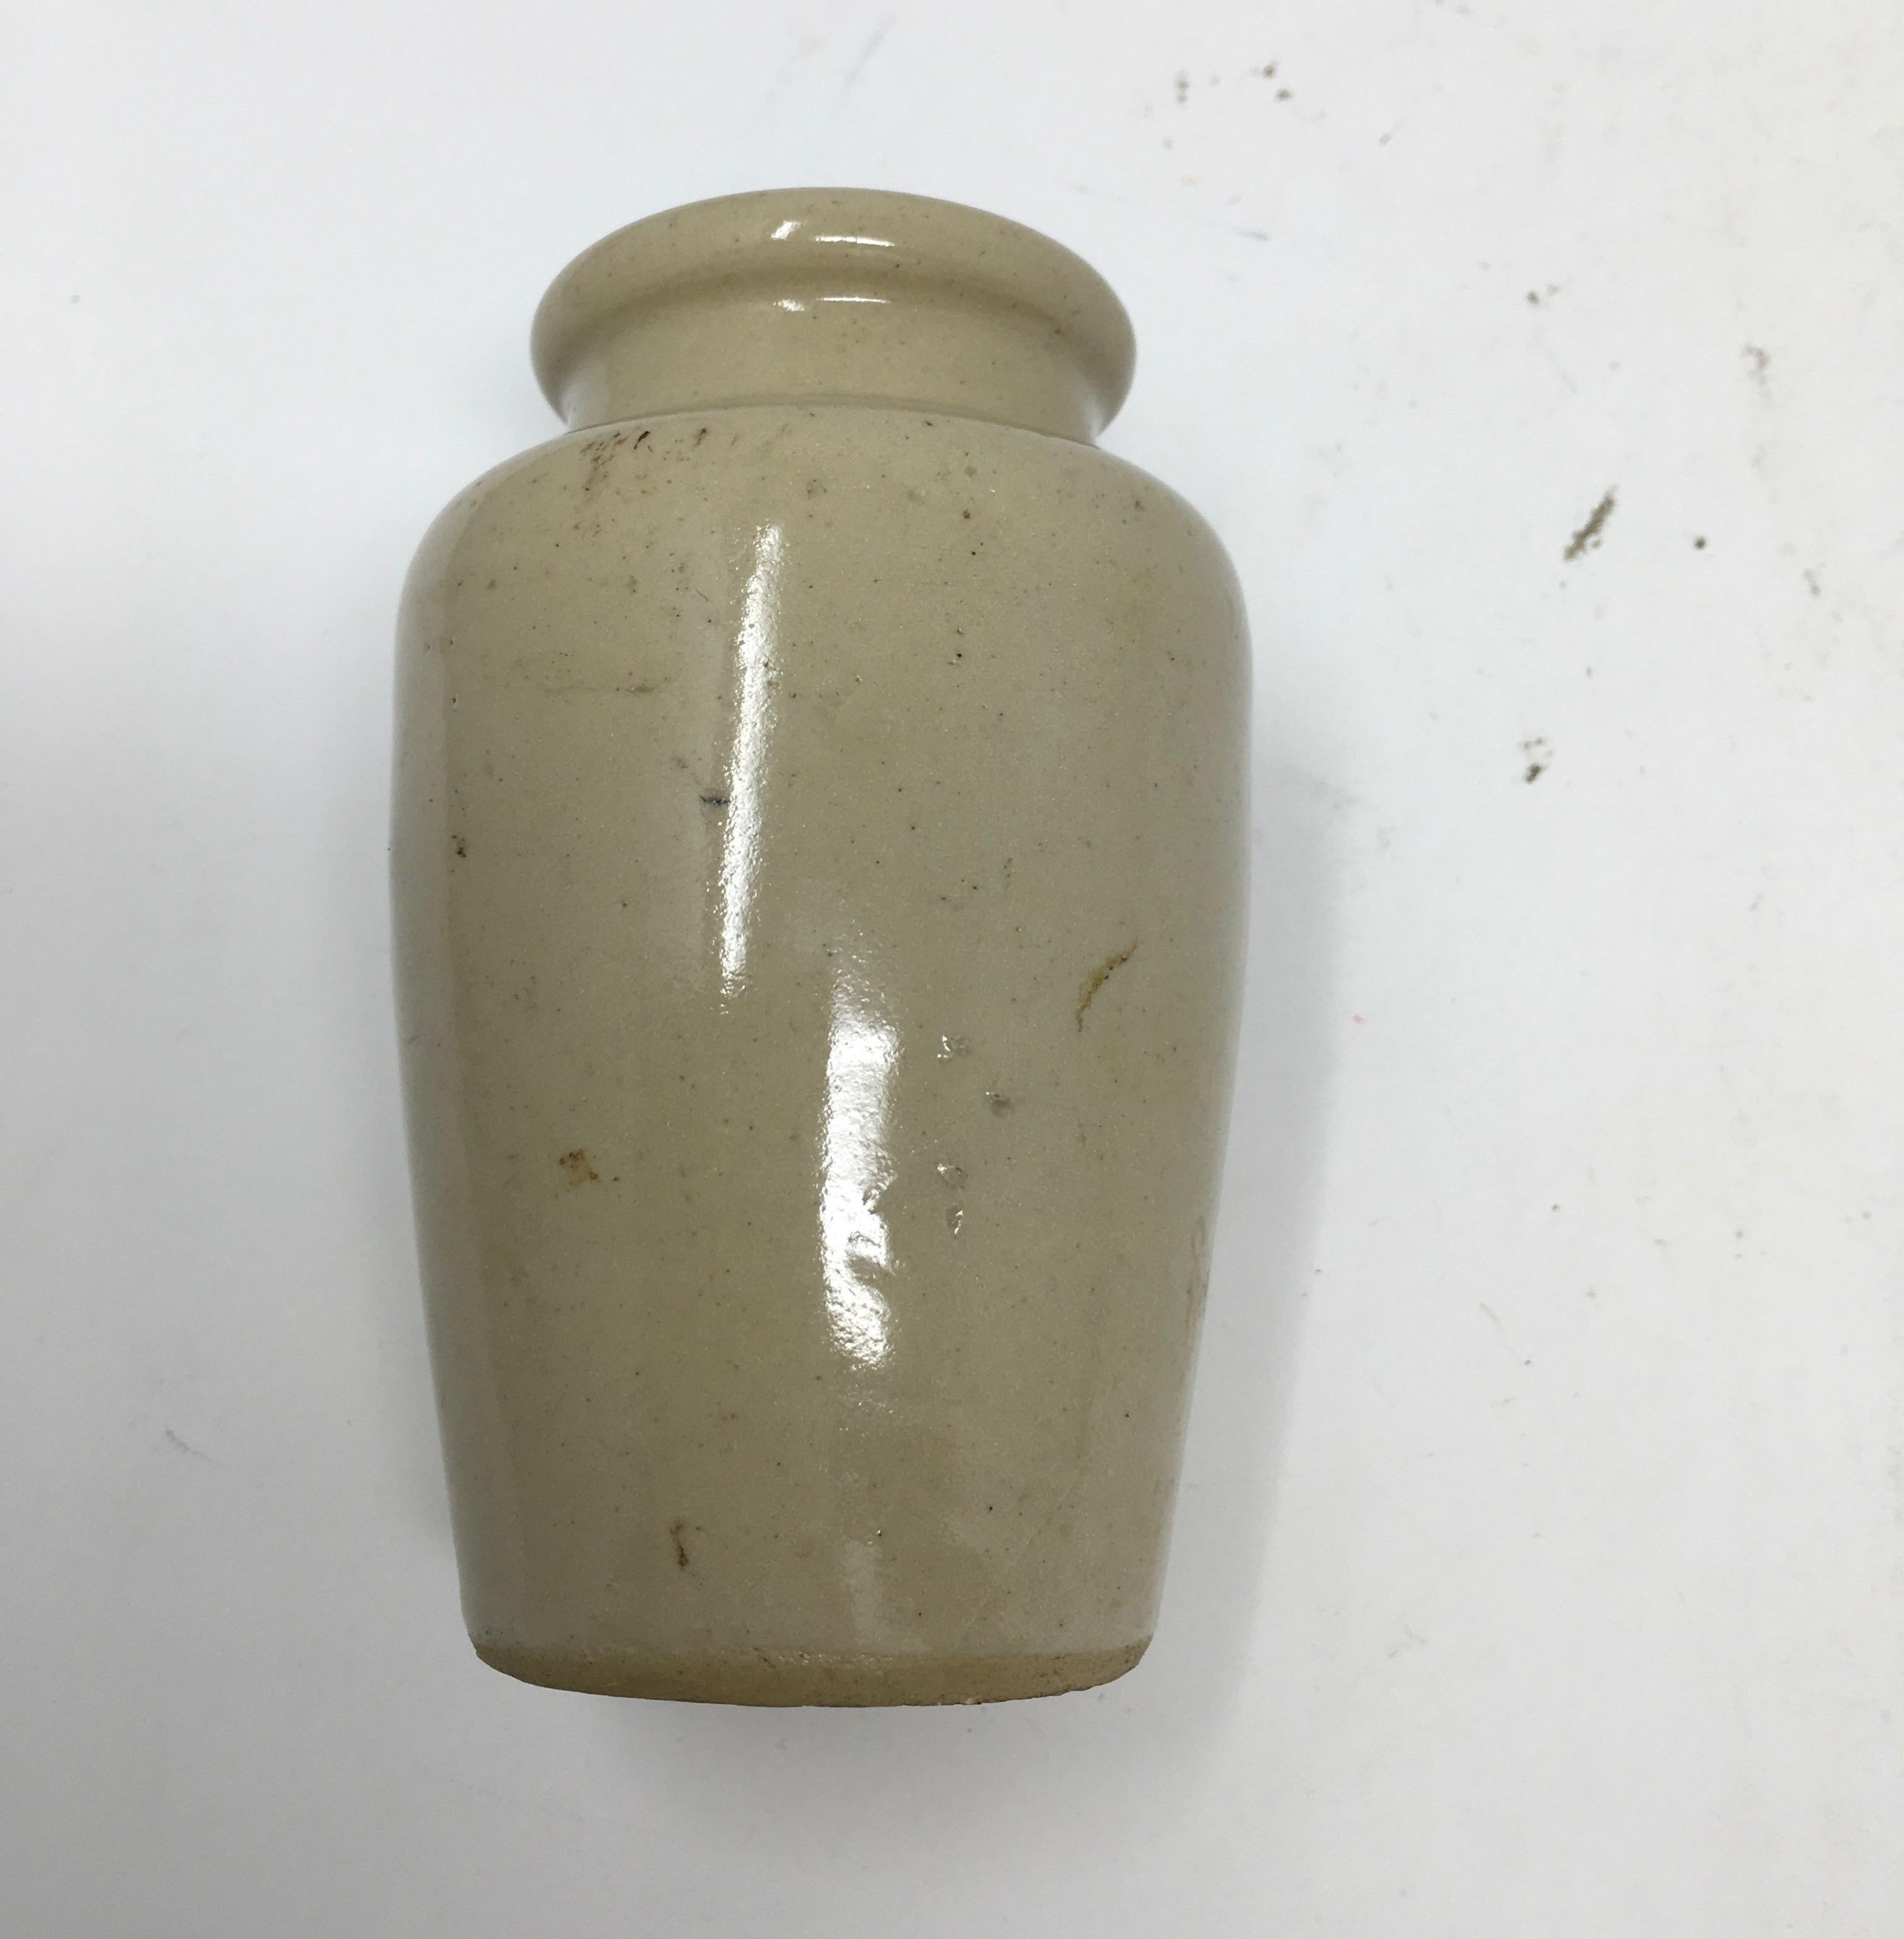 Found in England, this vintage Richardson's thick cream ironstone advertising jar from Sheffield is in good clean condition. The decorative pot that once held cream has transfer on the front in black lettering under the glaze and a picture of a cow